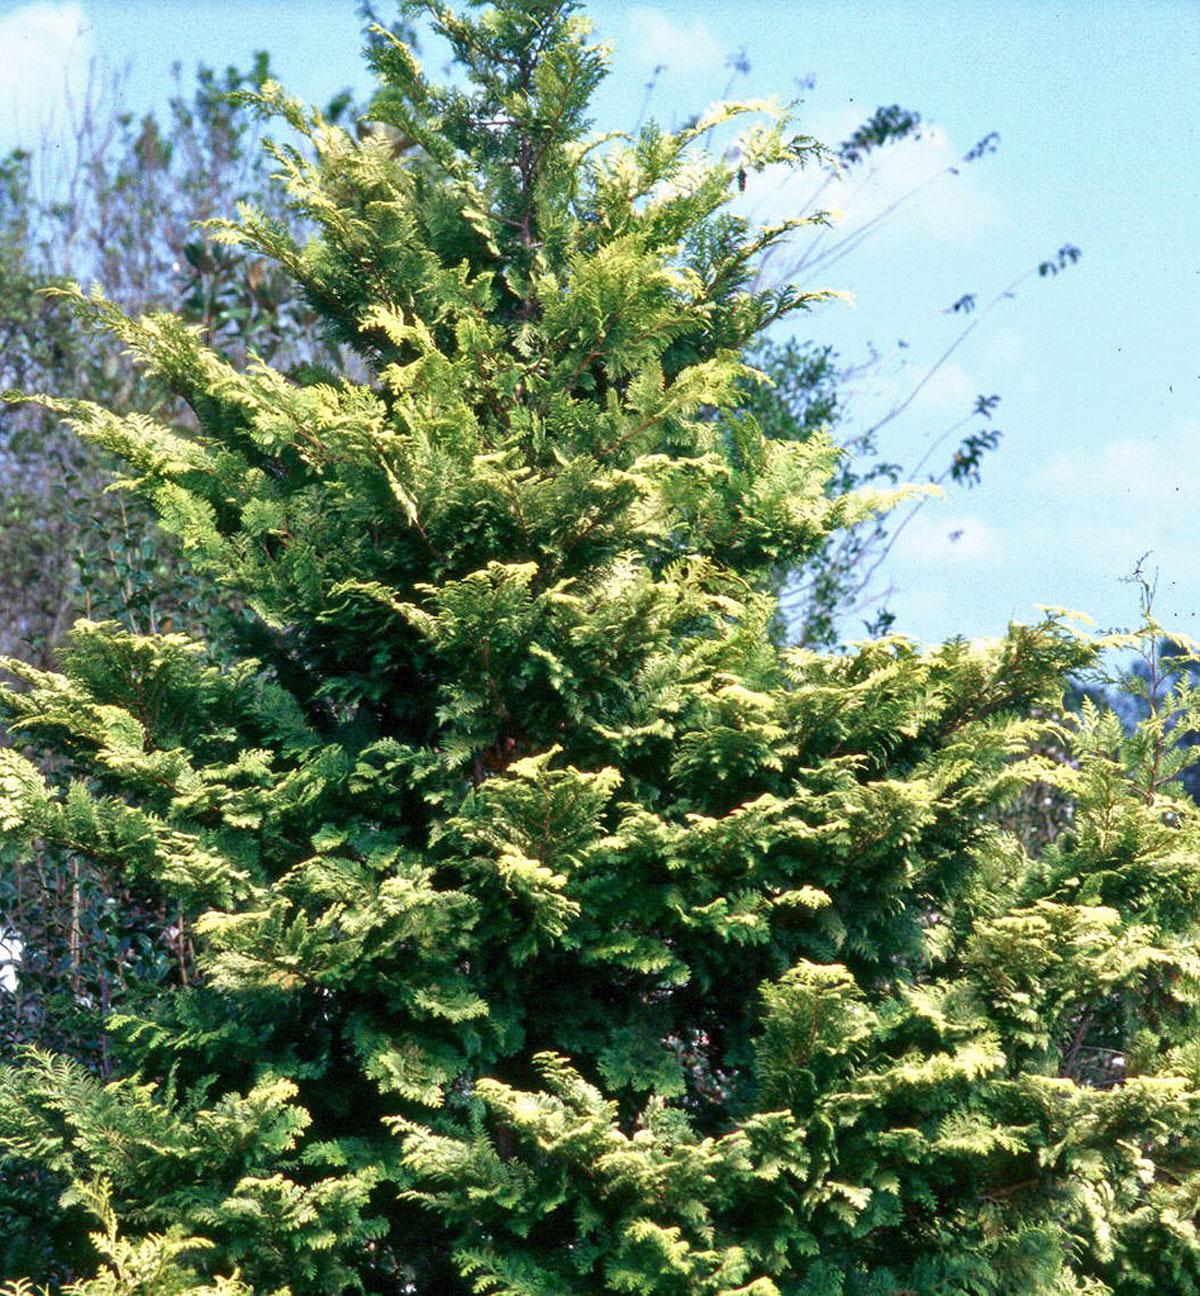 The Crippsii can grow to around 20 feet tall, but most are in the 10-foot range. The golden-yellow foliage really looks incredible during cold, dreary winter weather.